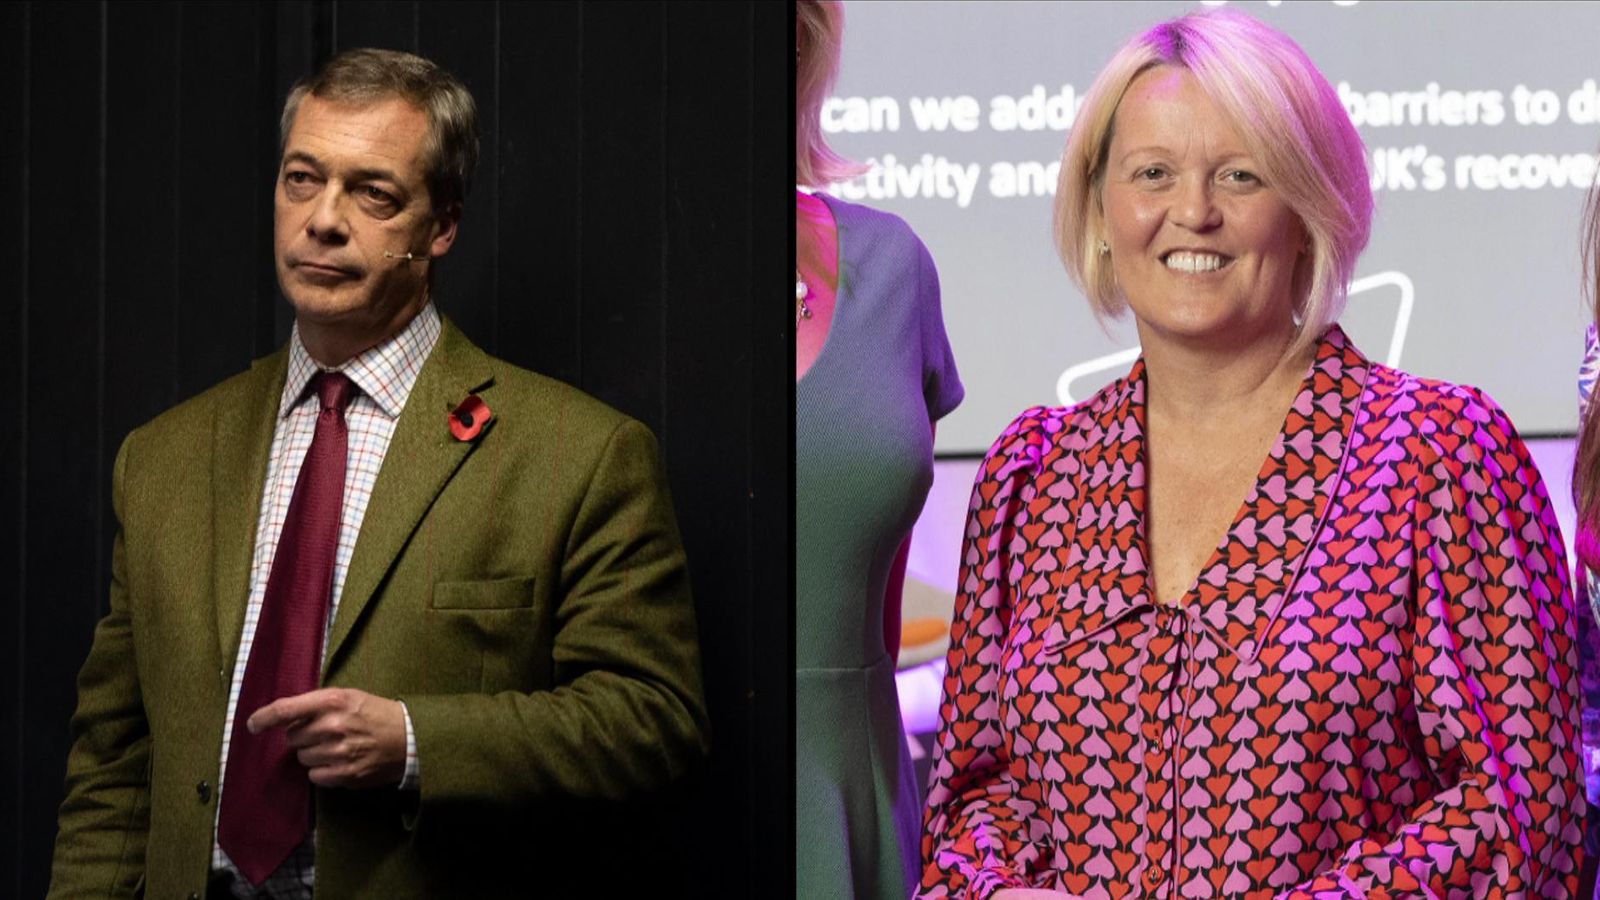 Watchdog apologises to ex-NatWest boss Alison Rose for suggesting she breached data rules over Farage bank details